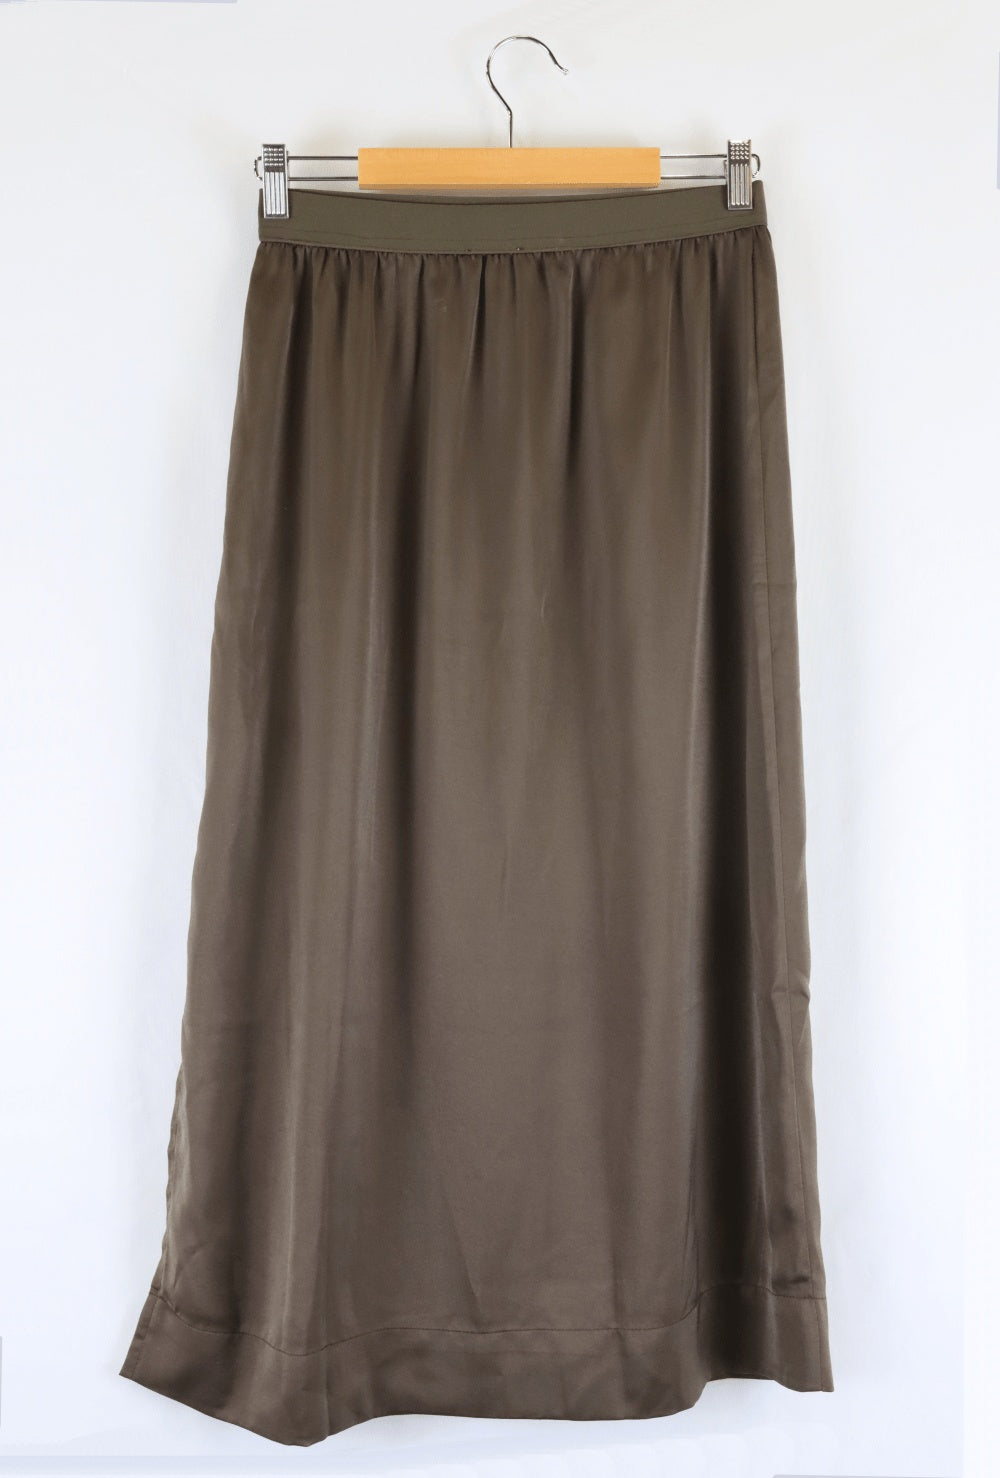 Ceres Brown Skirt 10